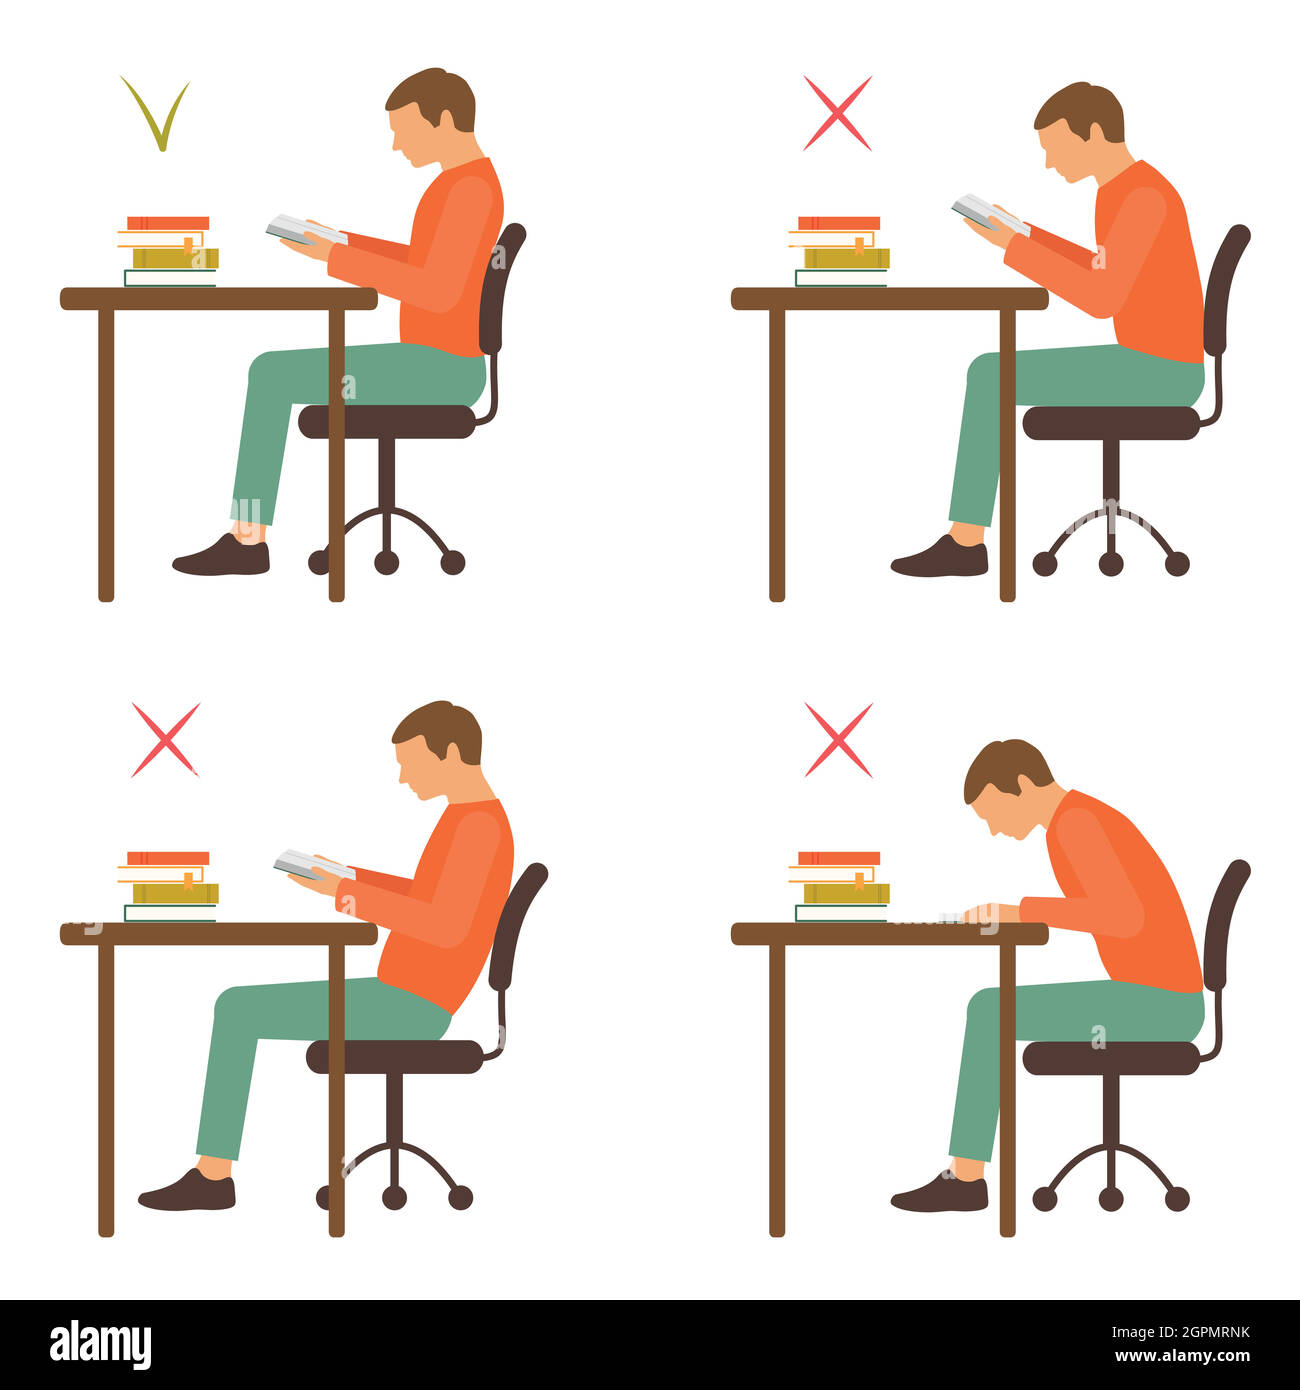 Ergonomics Correct And Incorrect Sitting Posture When Using A Computer  Stock Illustration - Download Image Now - iStock